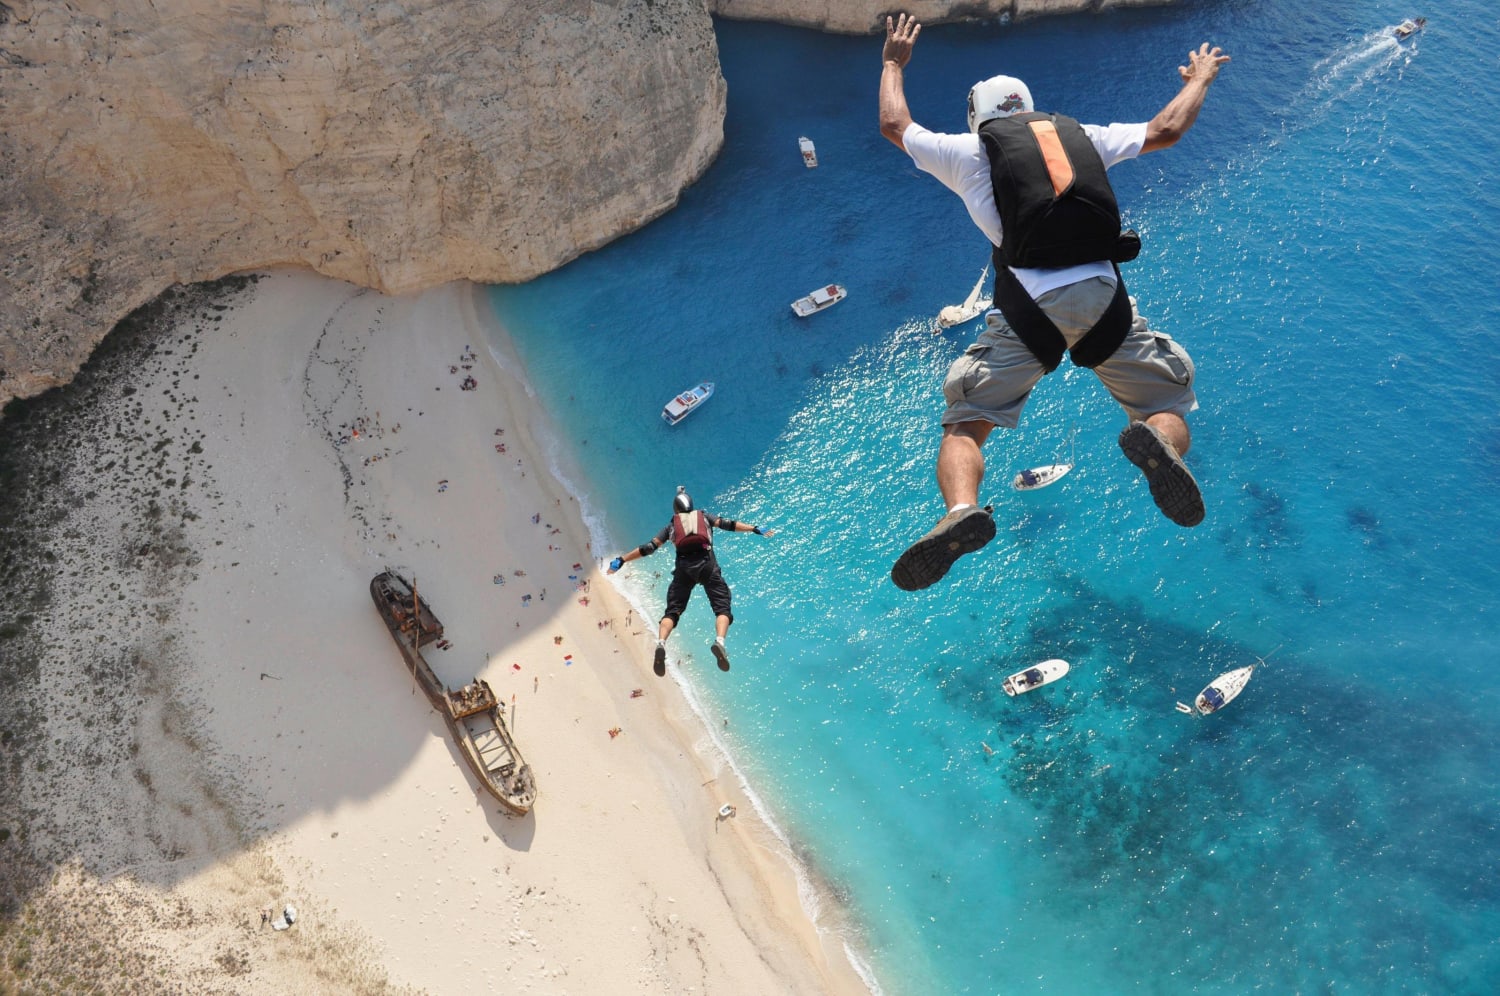 II. The Best BASE Jumping Locations Around the World